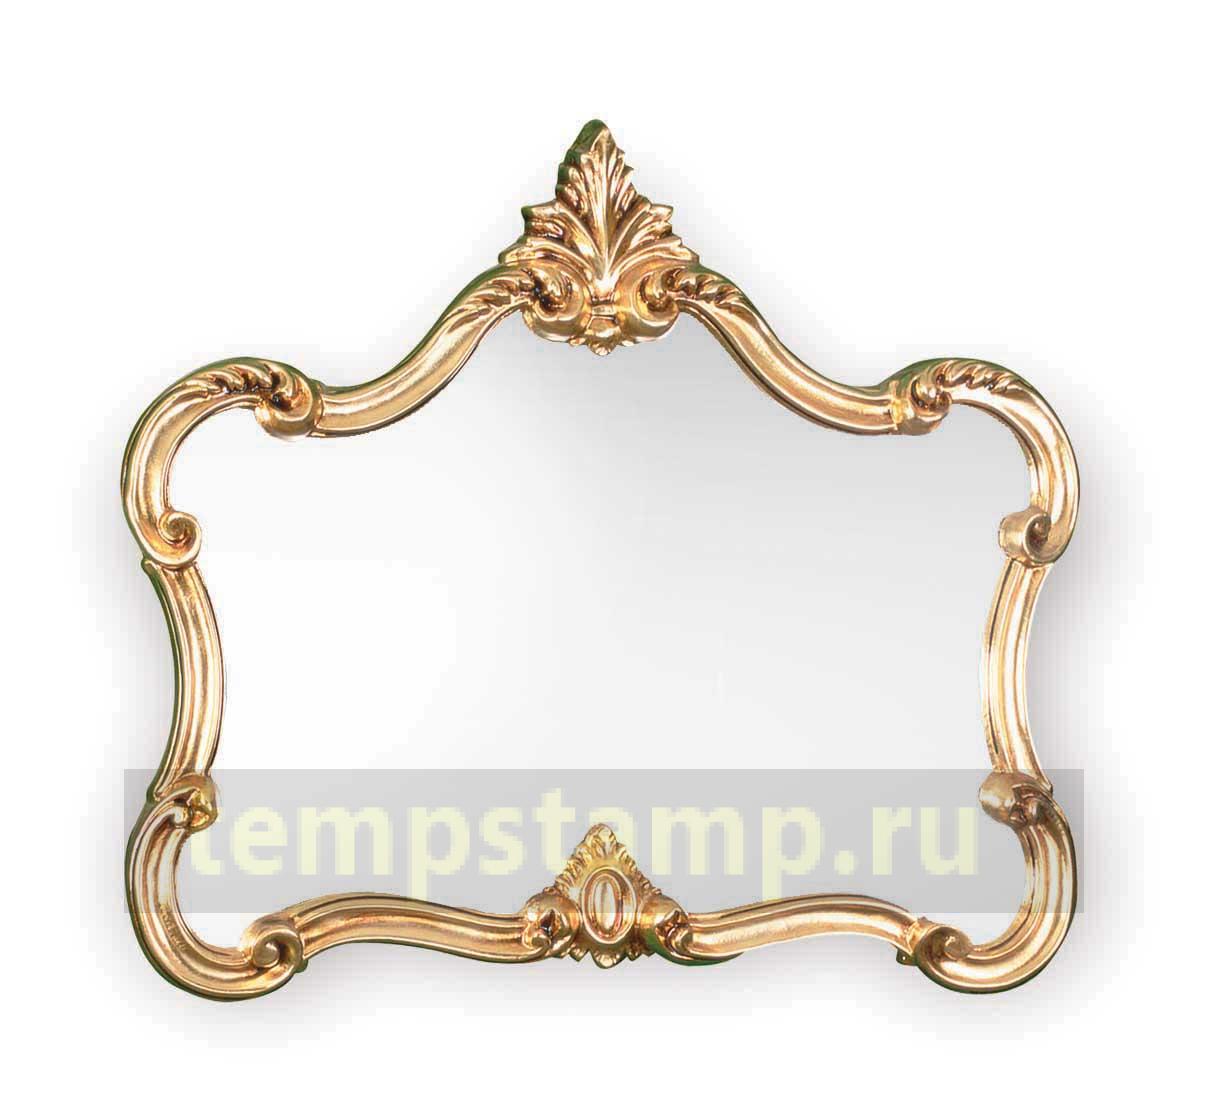 "Carved frame for a mirror"